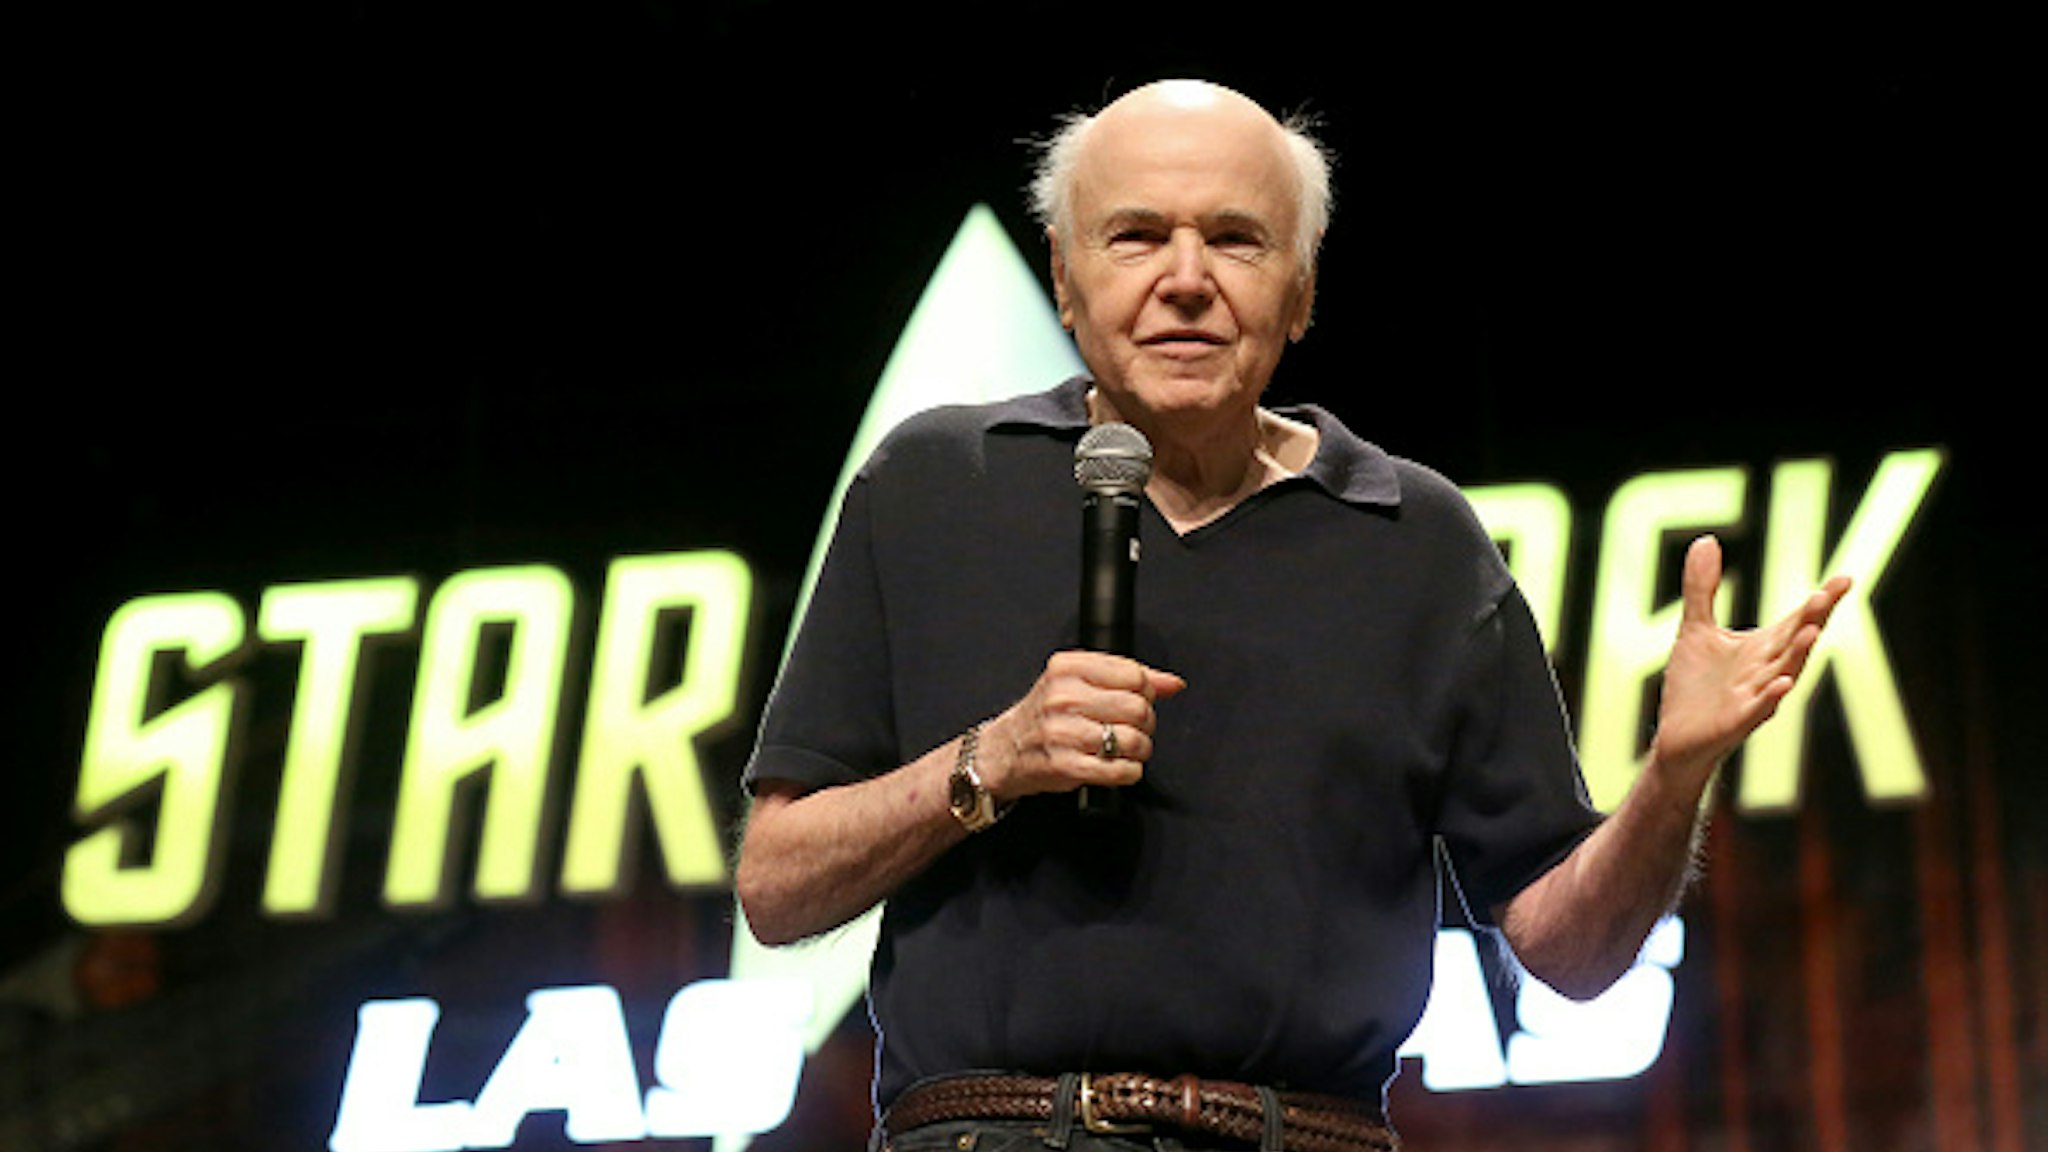 LAS VEGAS, NEVADA - AUGUST 02: Actor Walter Koenig speaks during "The Original Series" panel at the 18th annual Official Star Trek Convention at the Rio Hotel &amp; Casino on August 02, 2019 in Las Vegas, Nevada.